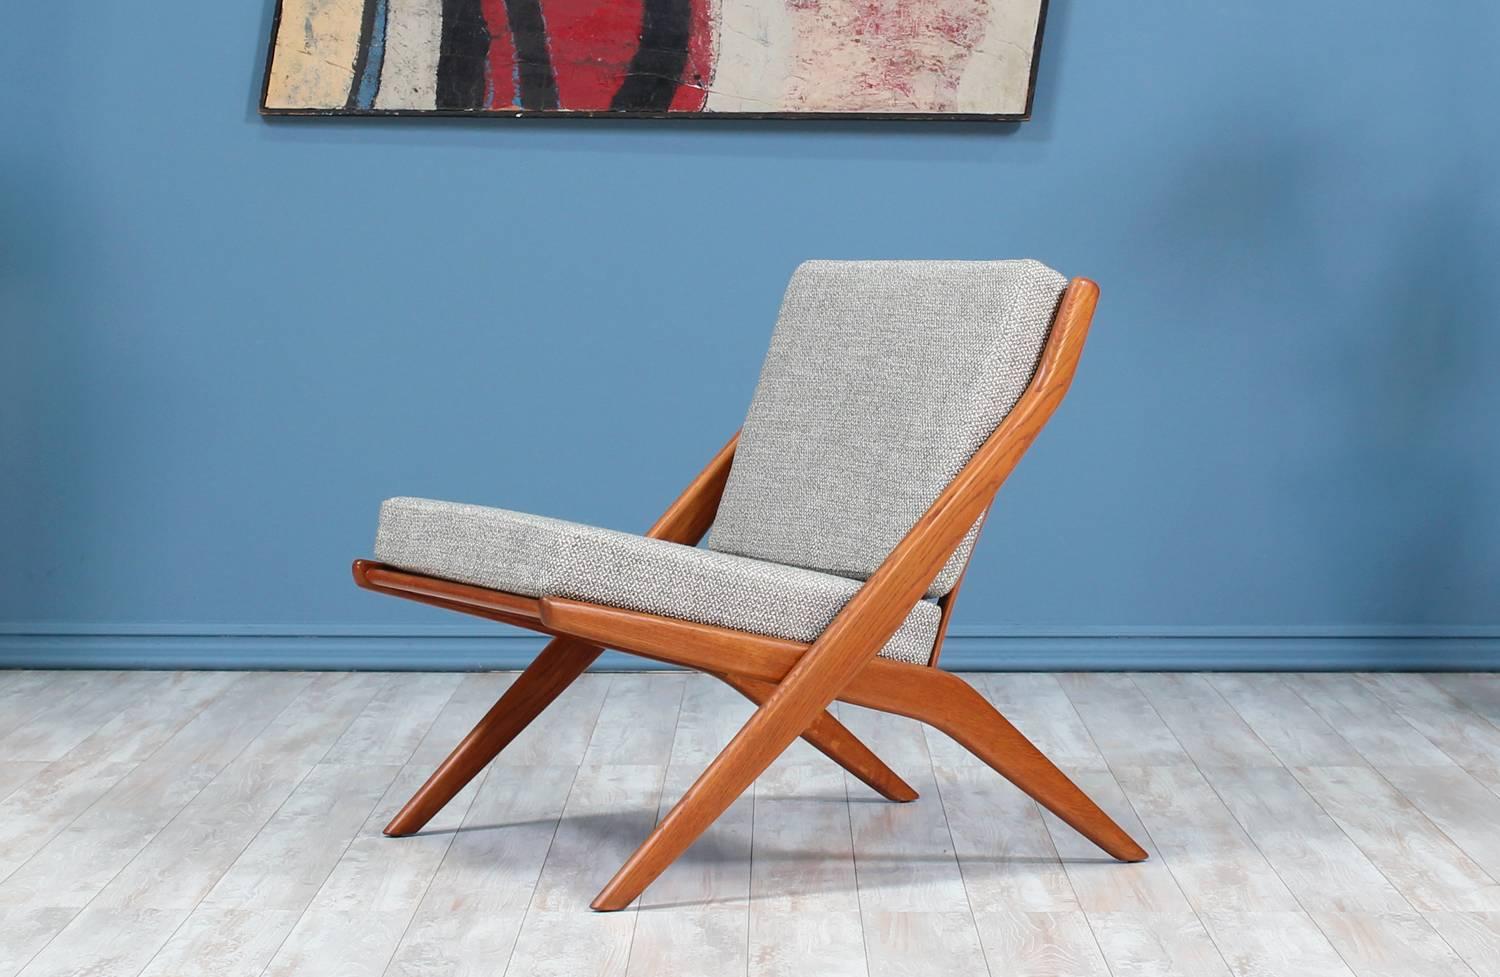 Lounge Chair designed by Folke Ohlsson for Dux of Sweden circa 1950’s. Newly refinished and new upholstered foam cushions with a high-quality tweed fabric in a textured grey color. This Scandinavian modern design features a scissor-like teak wood